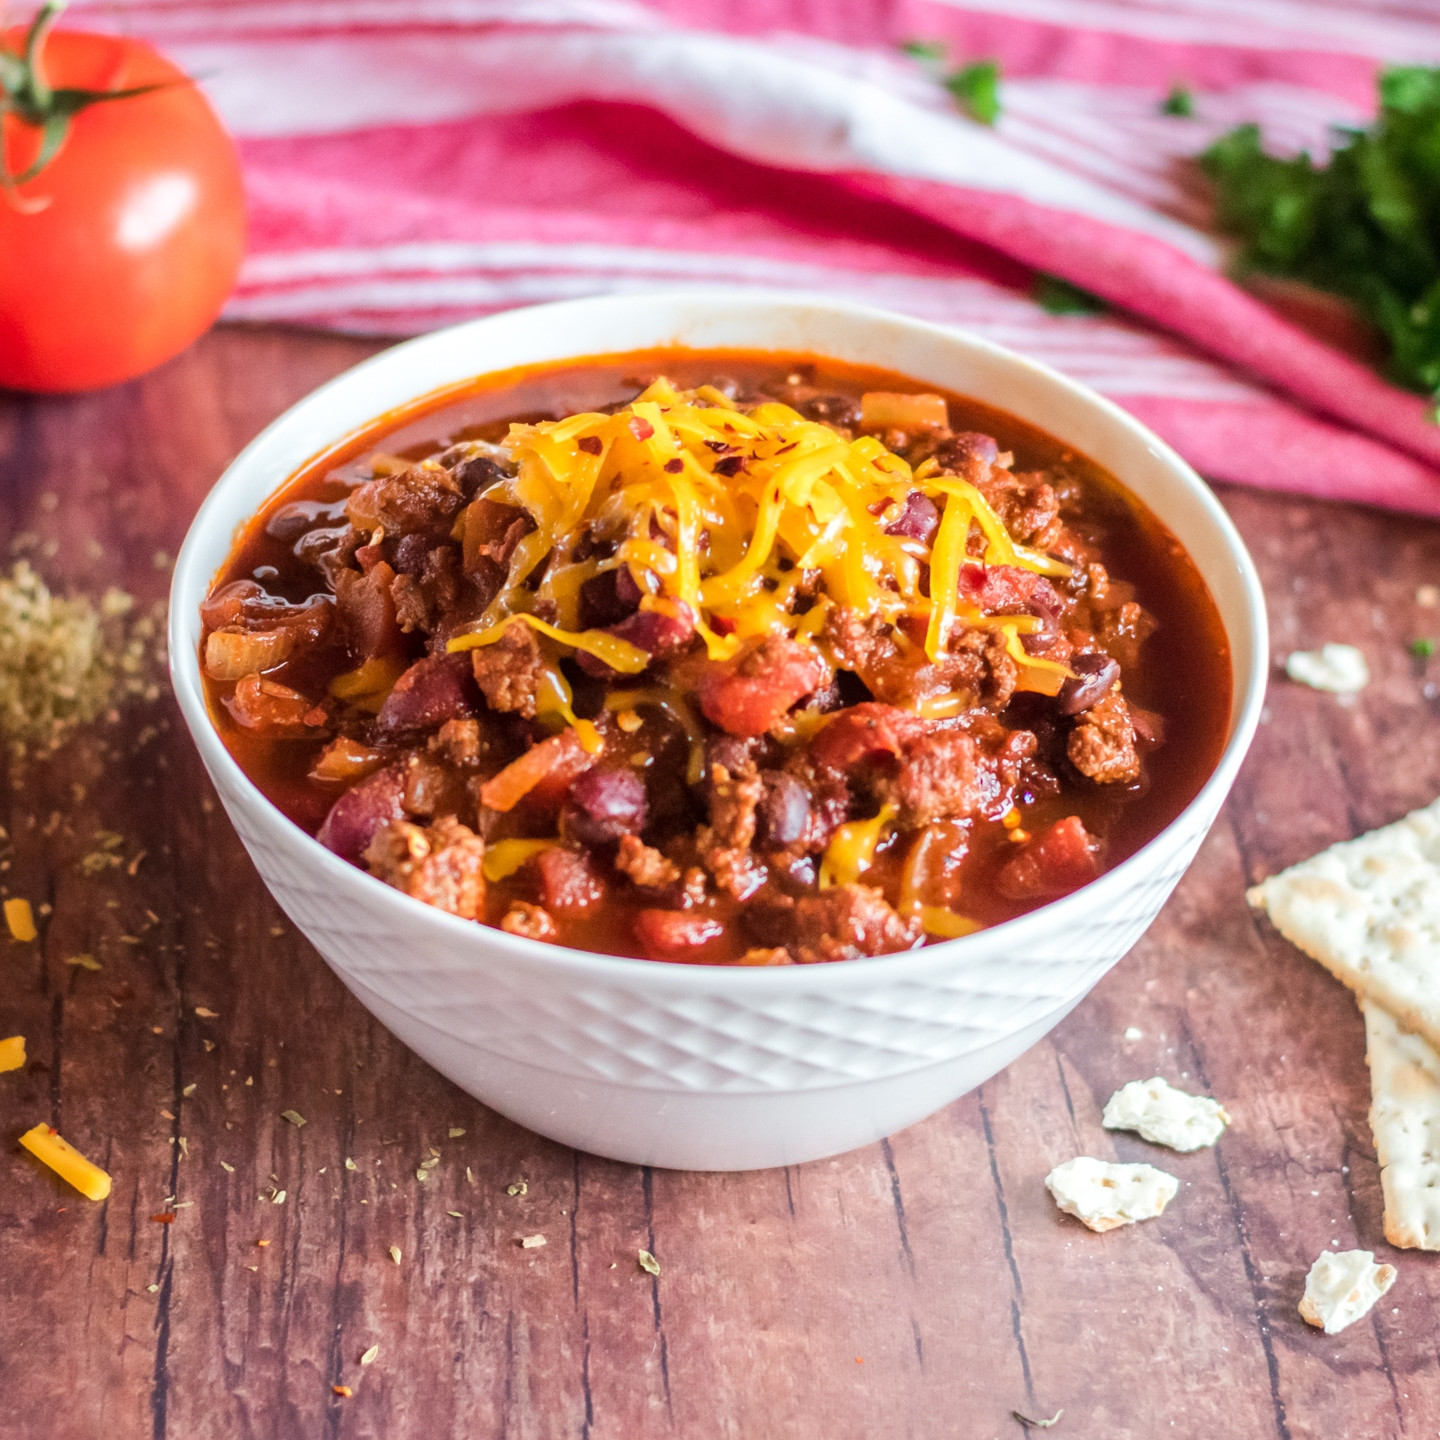 Ground Beef Chili Recipe Stovetop Unique the Best Ground Beef Chili